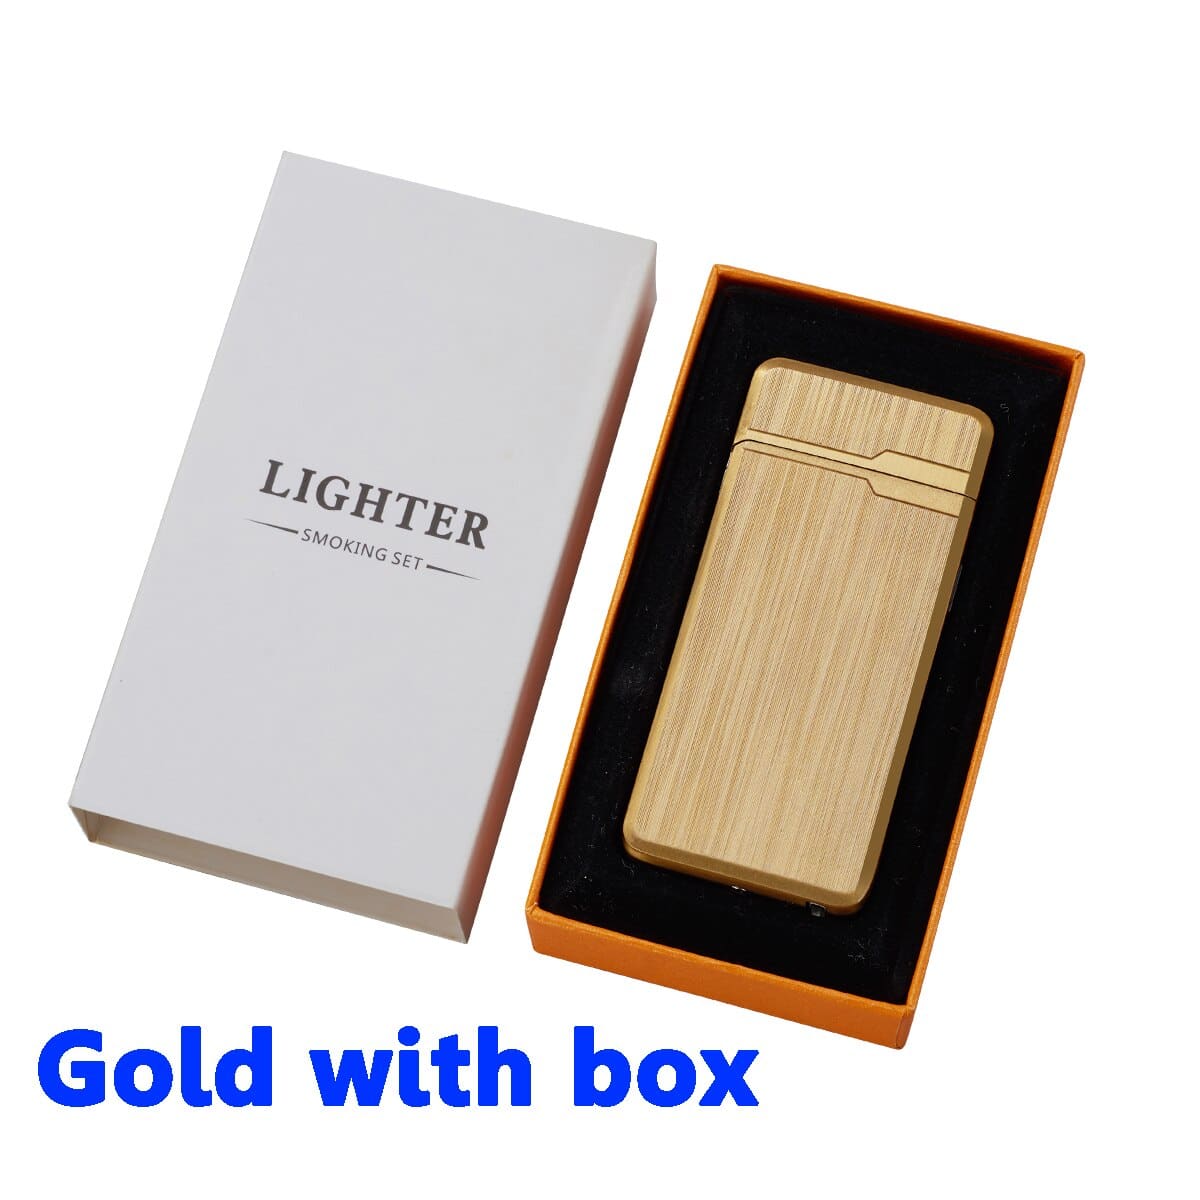 Gold with box